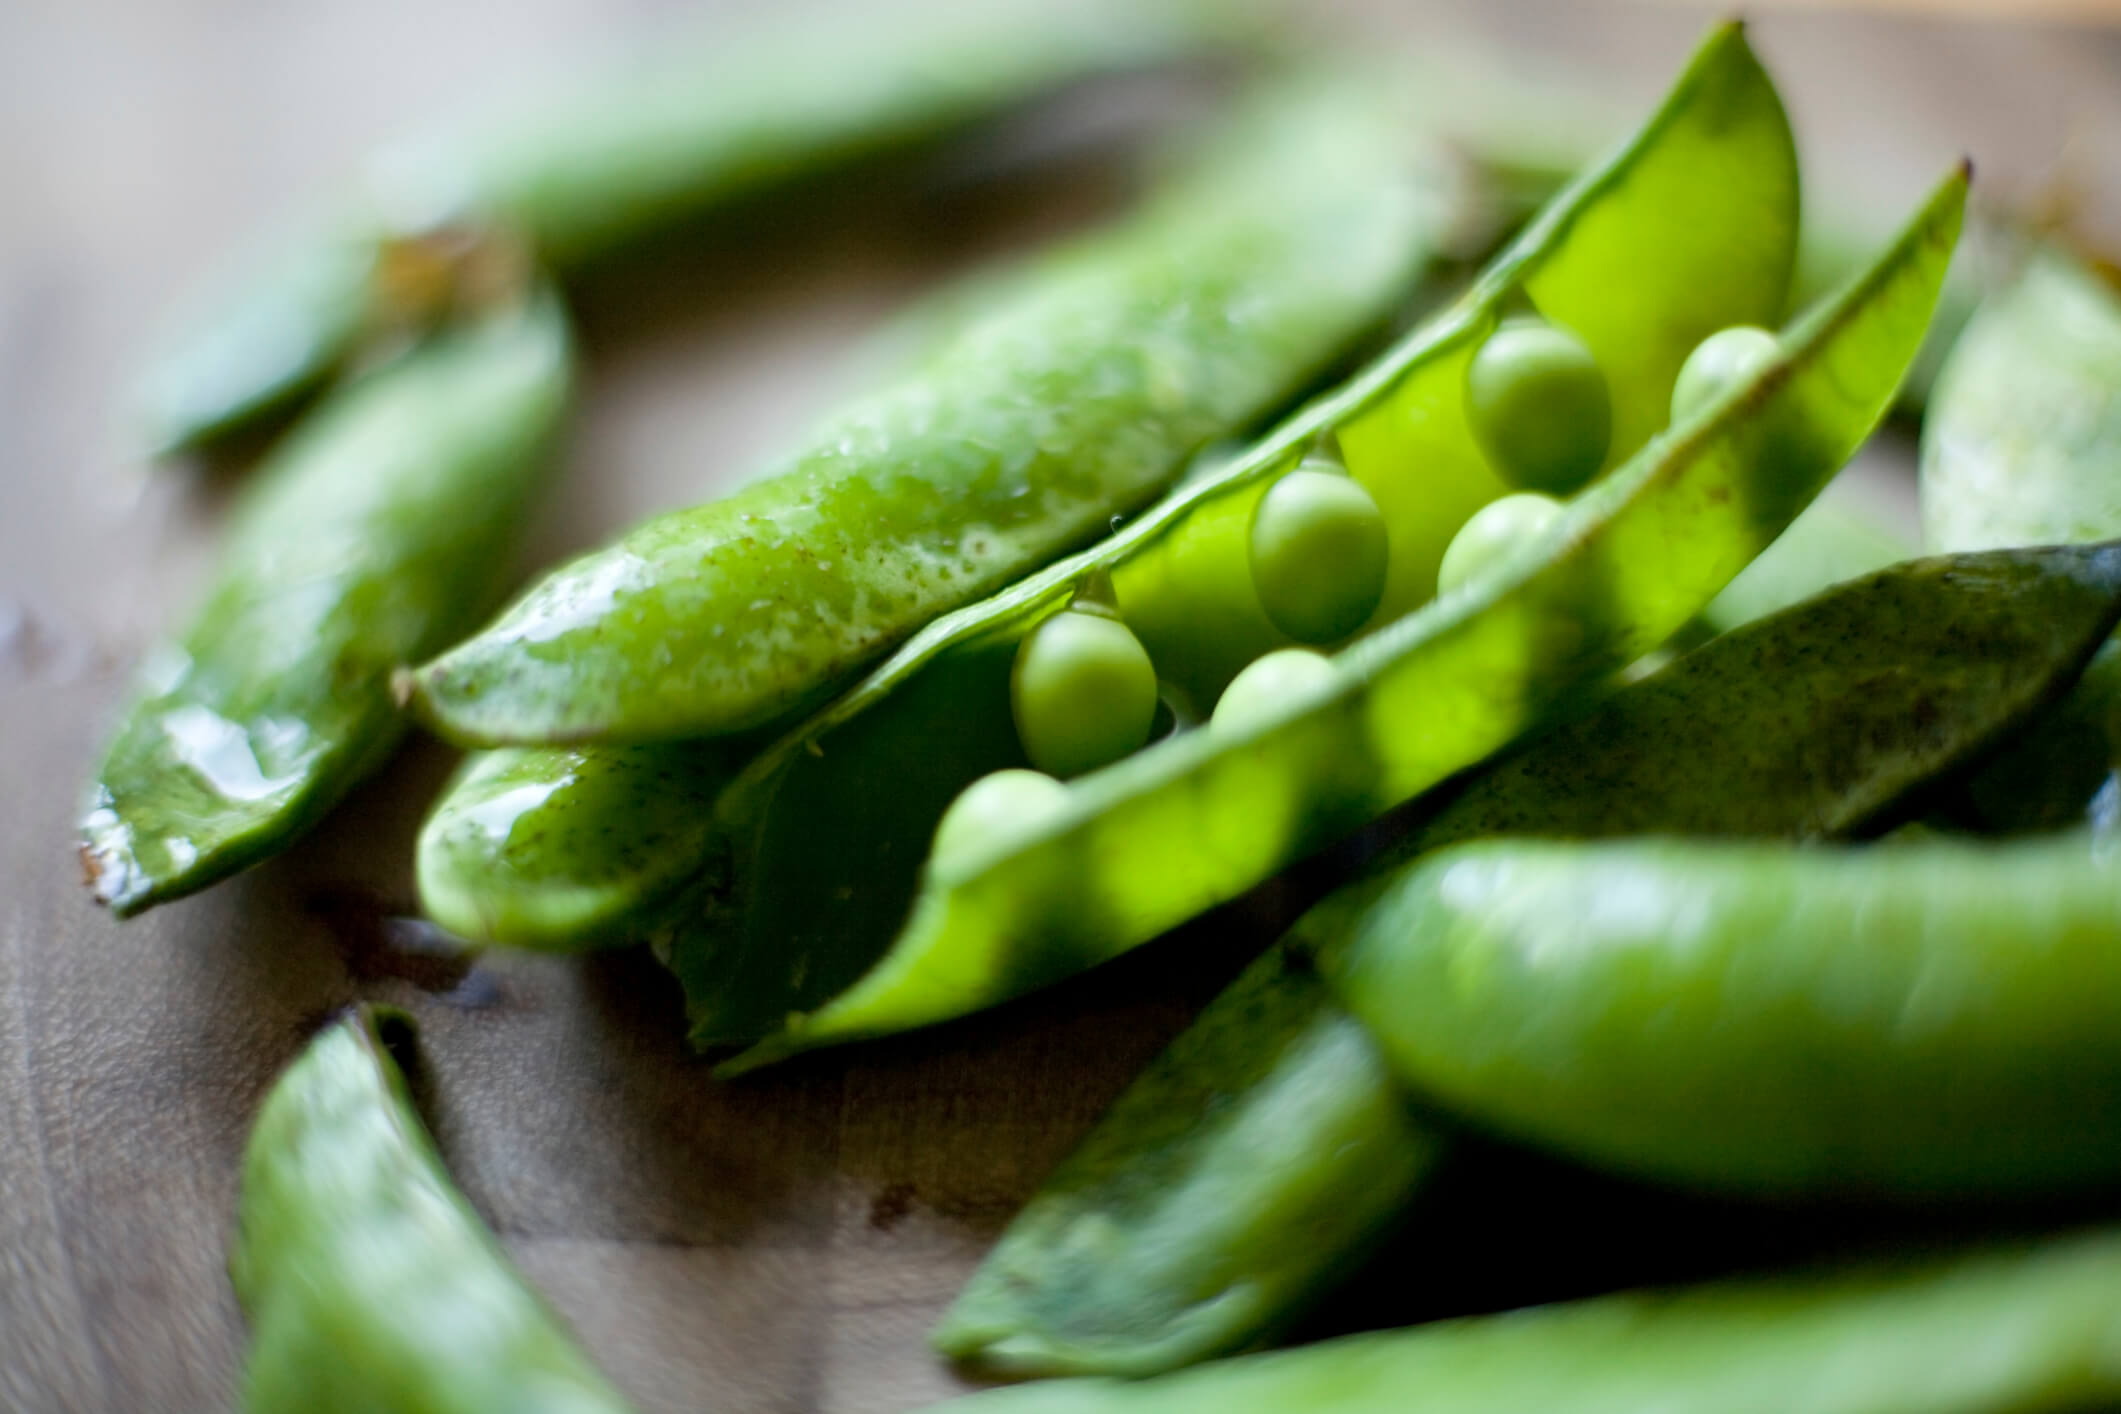 Spring vegetables and fruits: peas